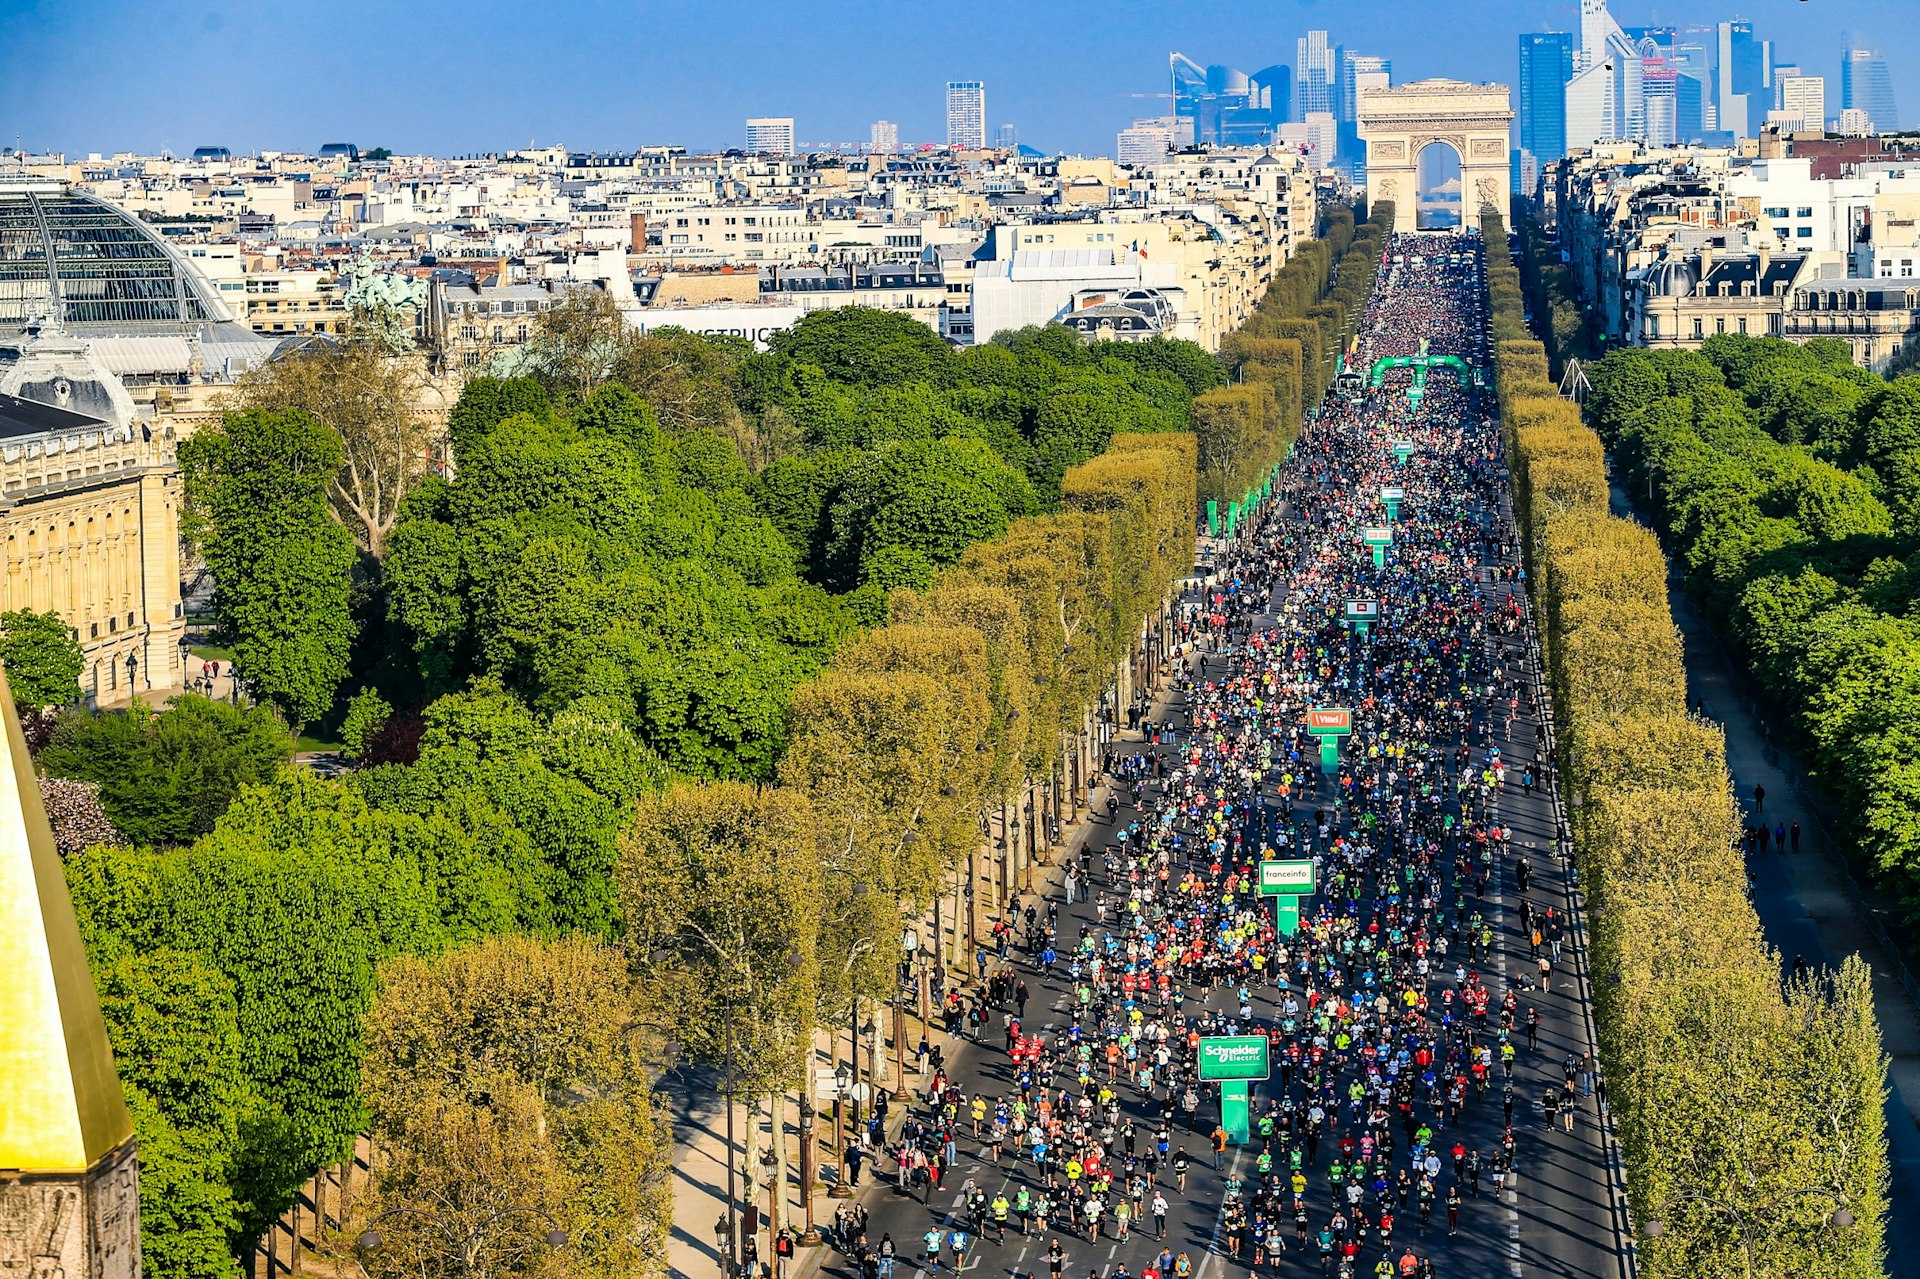 Under a cloudless sky tens of thousands of runners make their way from the Arc de Triomphe down the tree-lined Champs-Élysées.